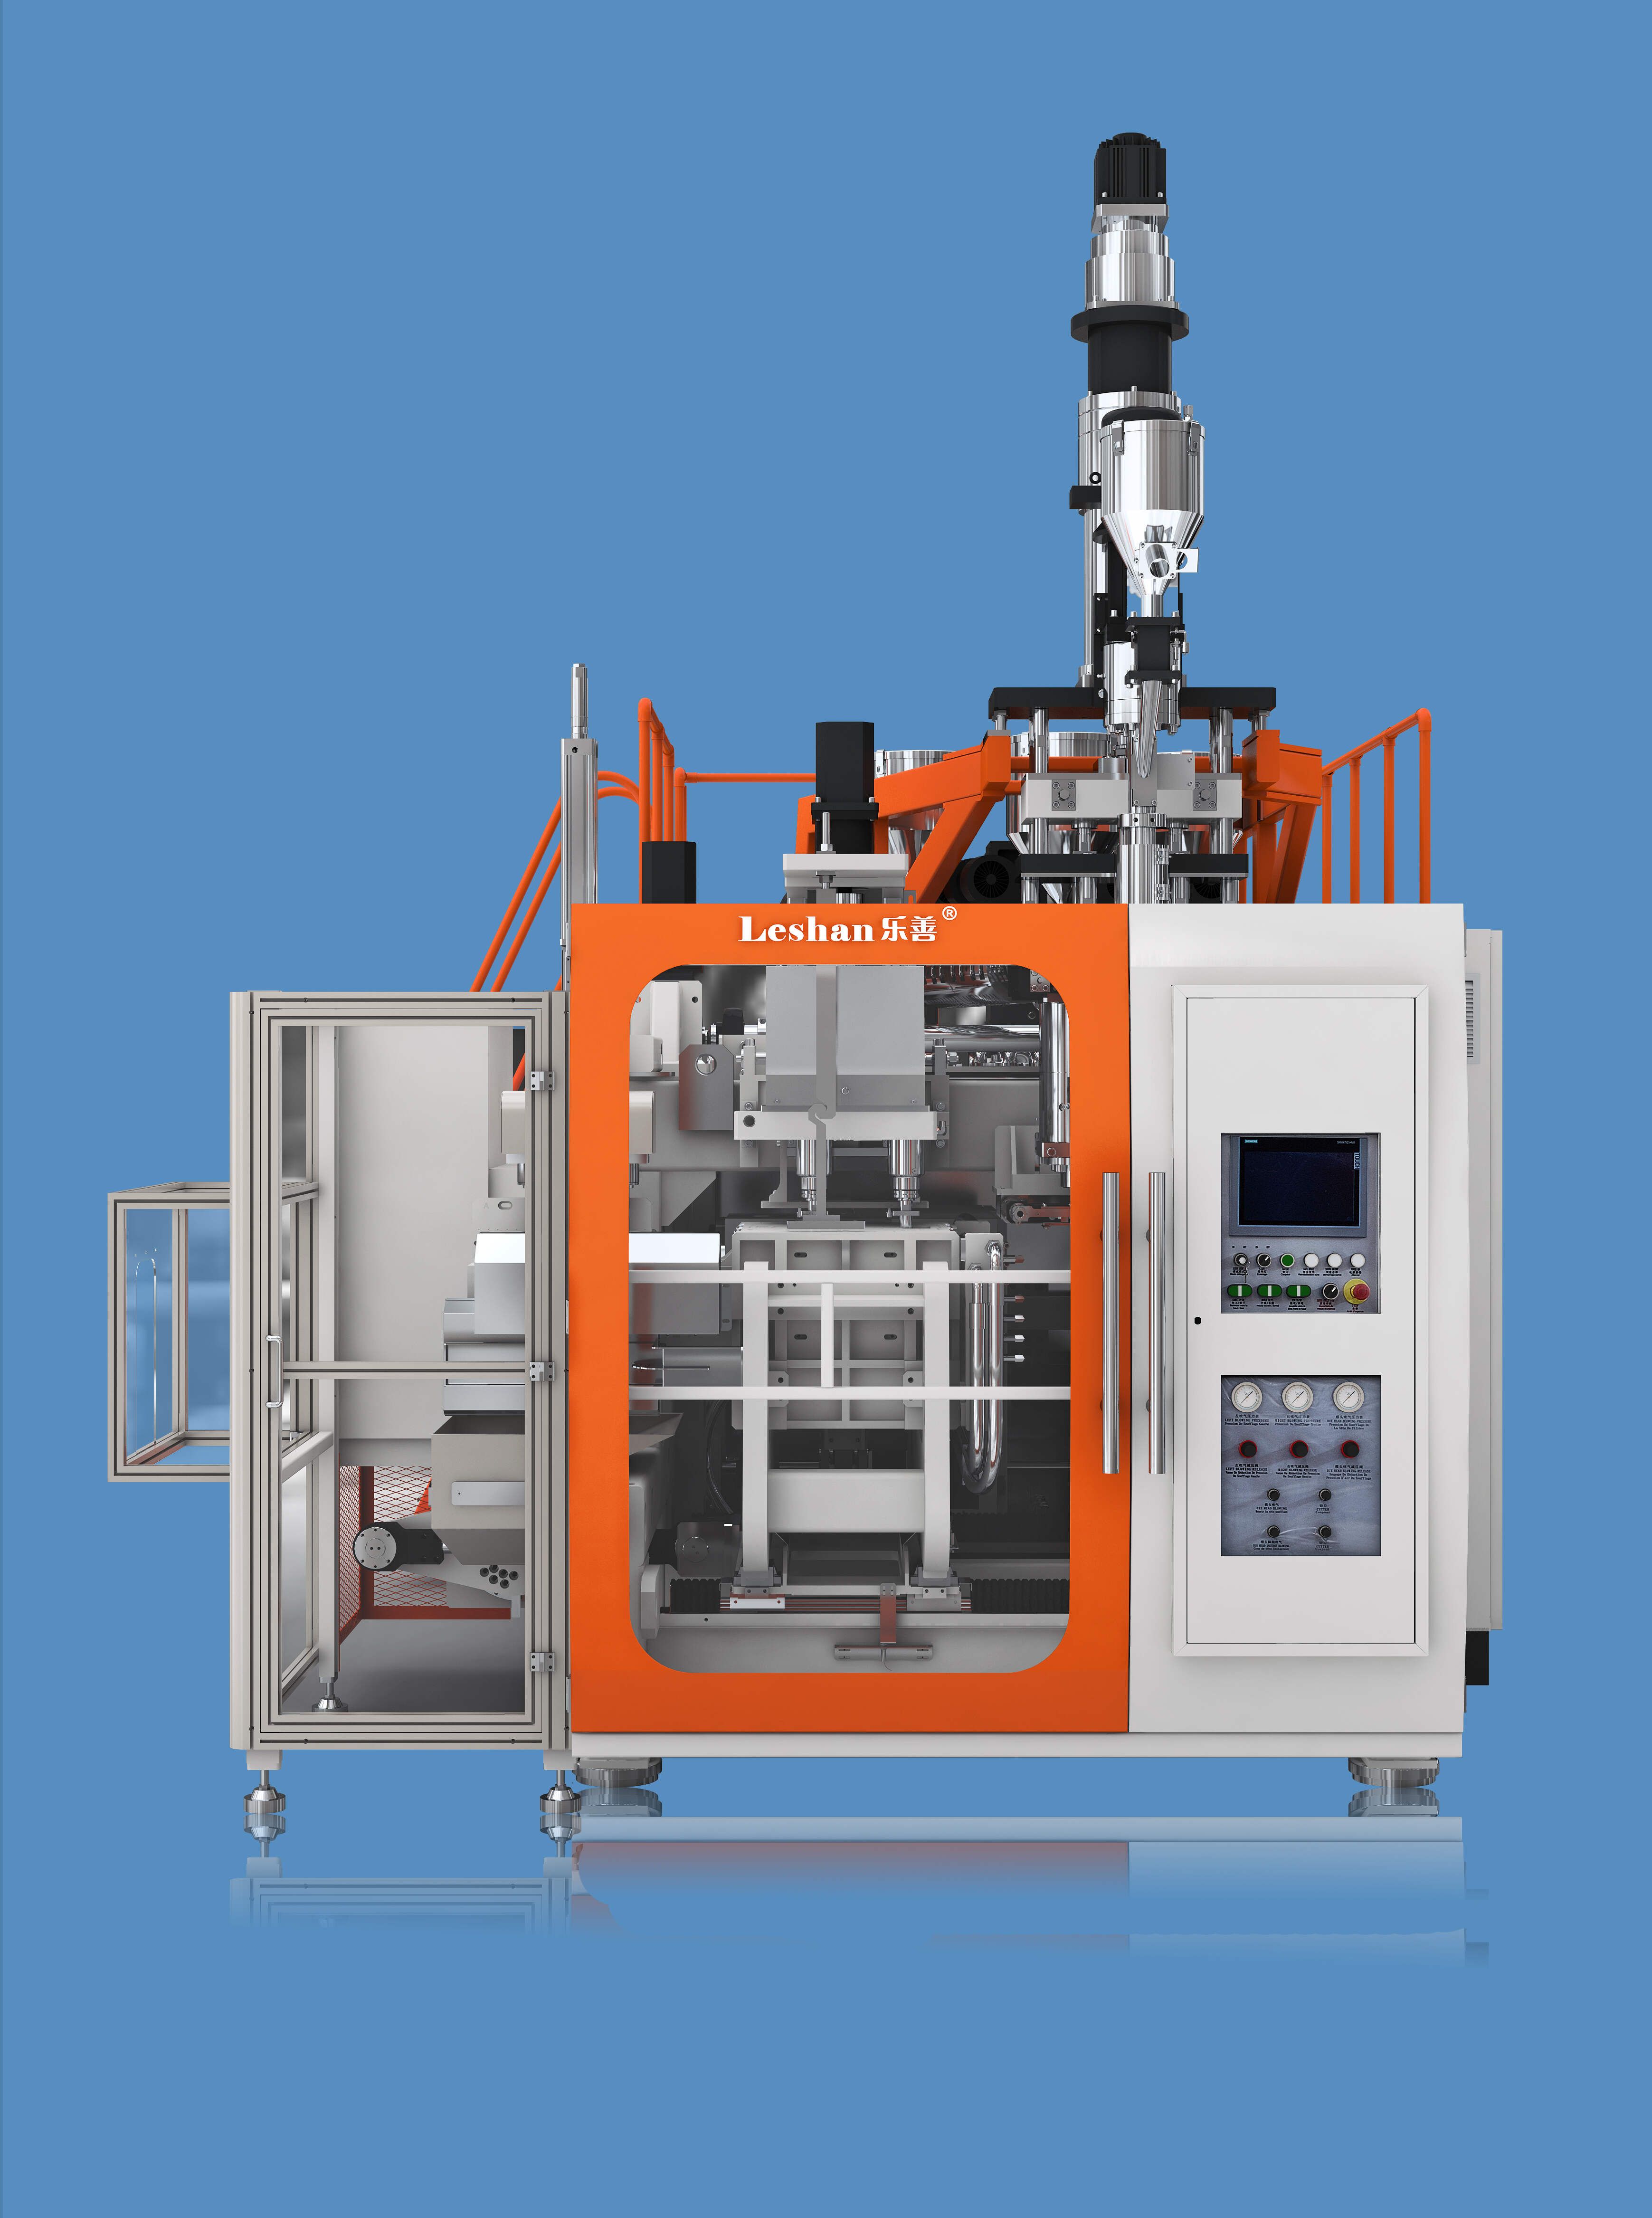 How to install the machine and use the abs blow molding machine?